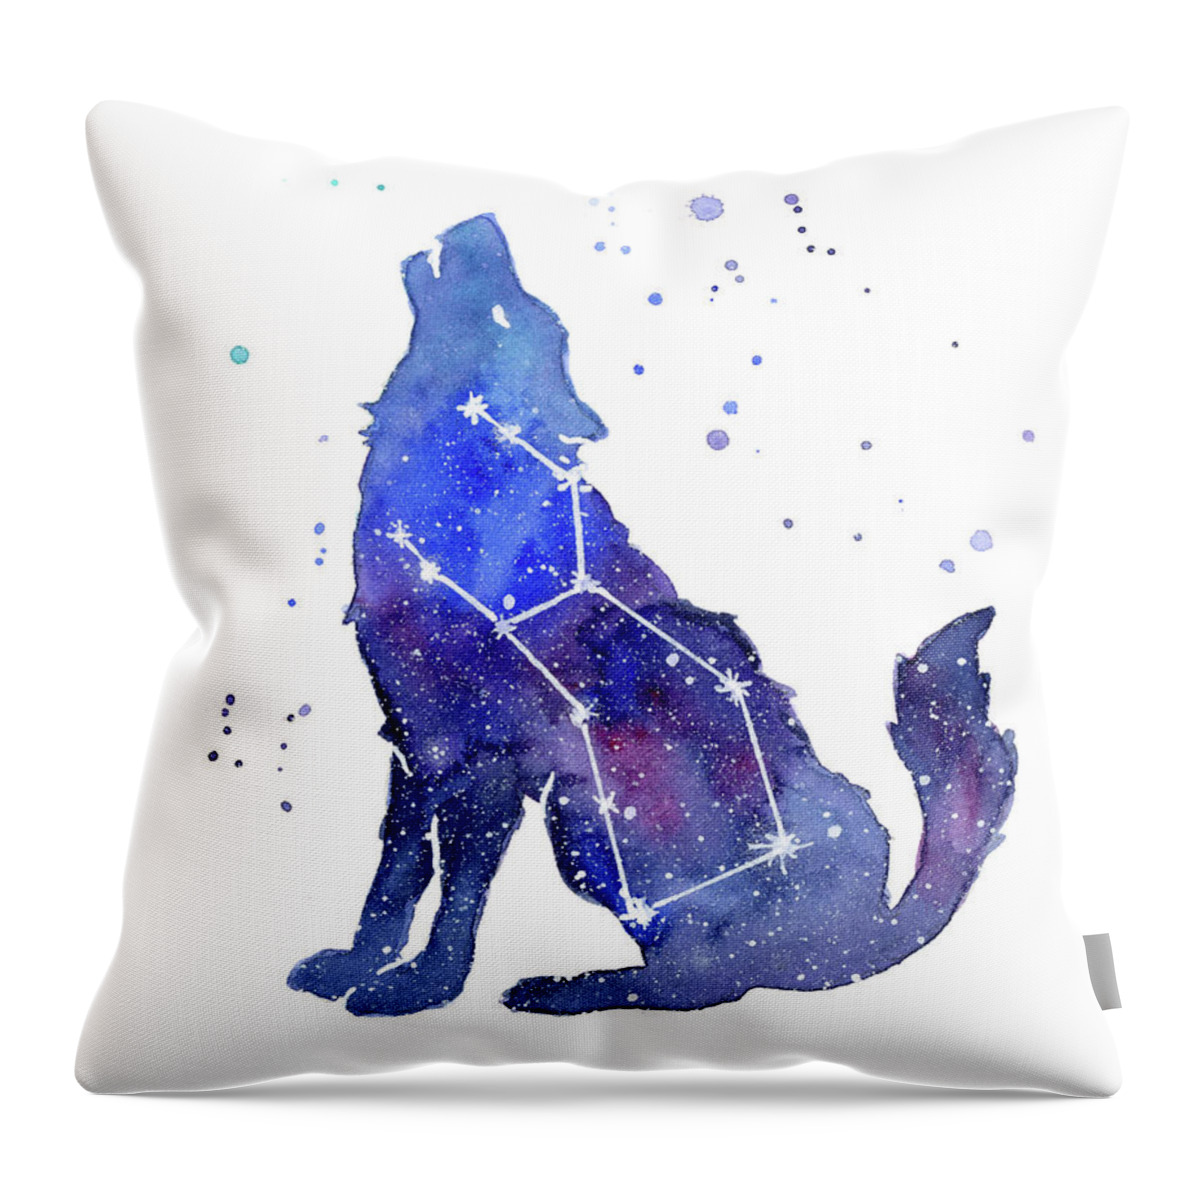 Wolf Throw Pillow featuring the painting Galaxy Wolf - Lupus Constellation by Olga Shvartsur